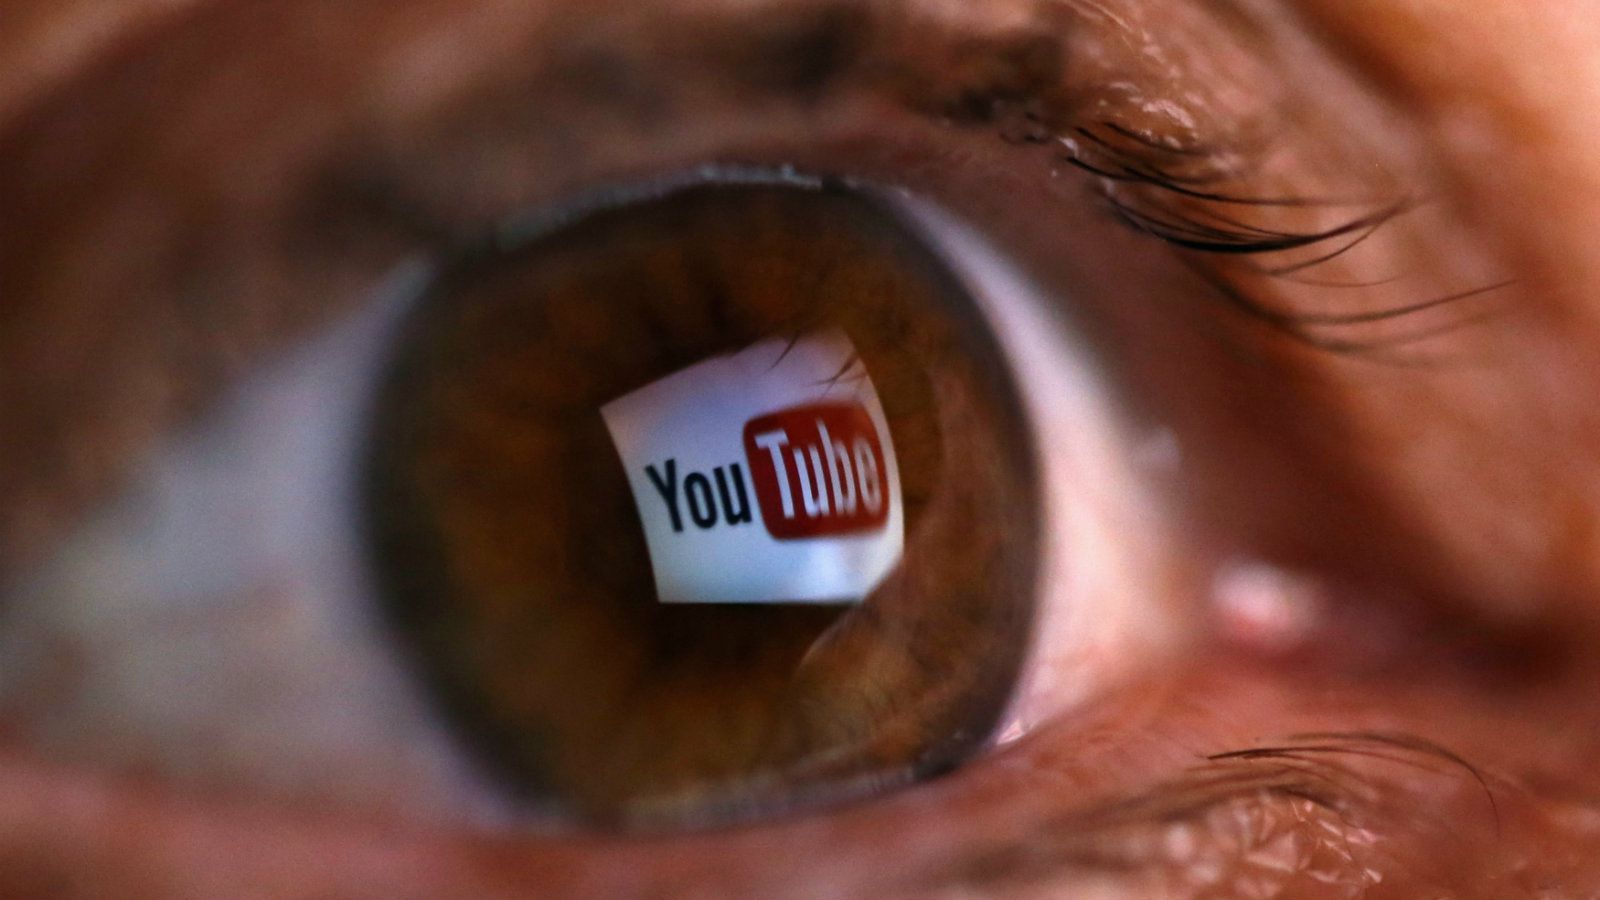 Image: YouTube issues new rule prohibiting any criticism of LGBTQ persons